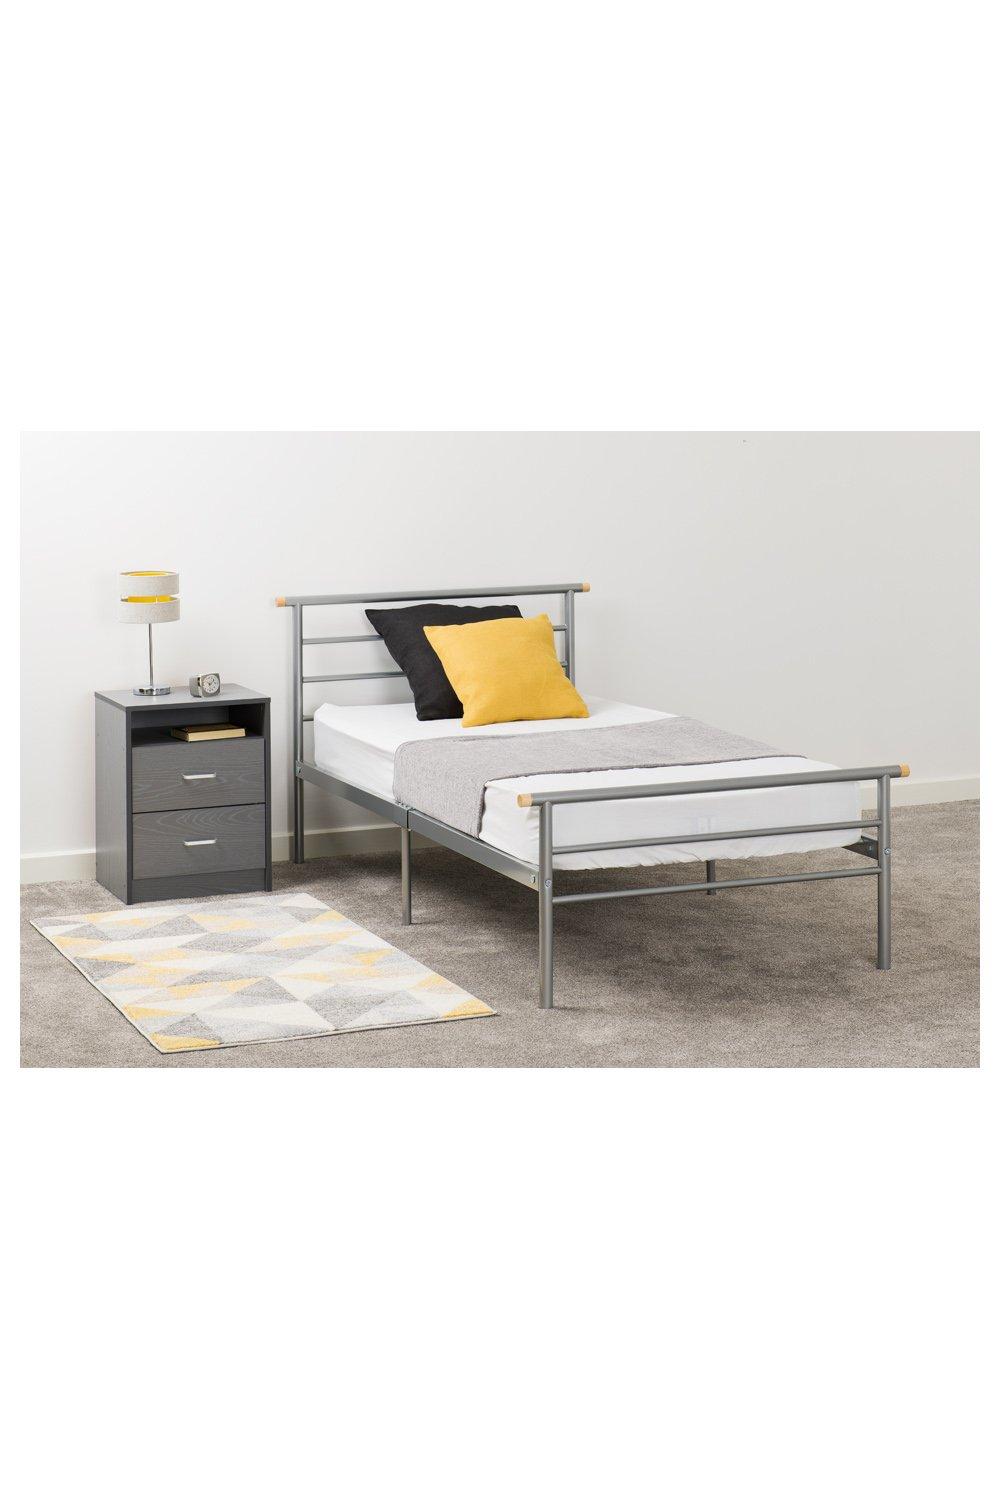 Orion 3' Single Bed